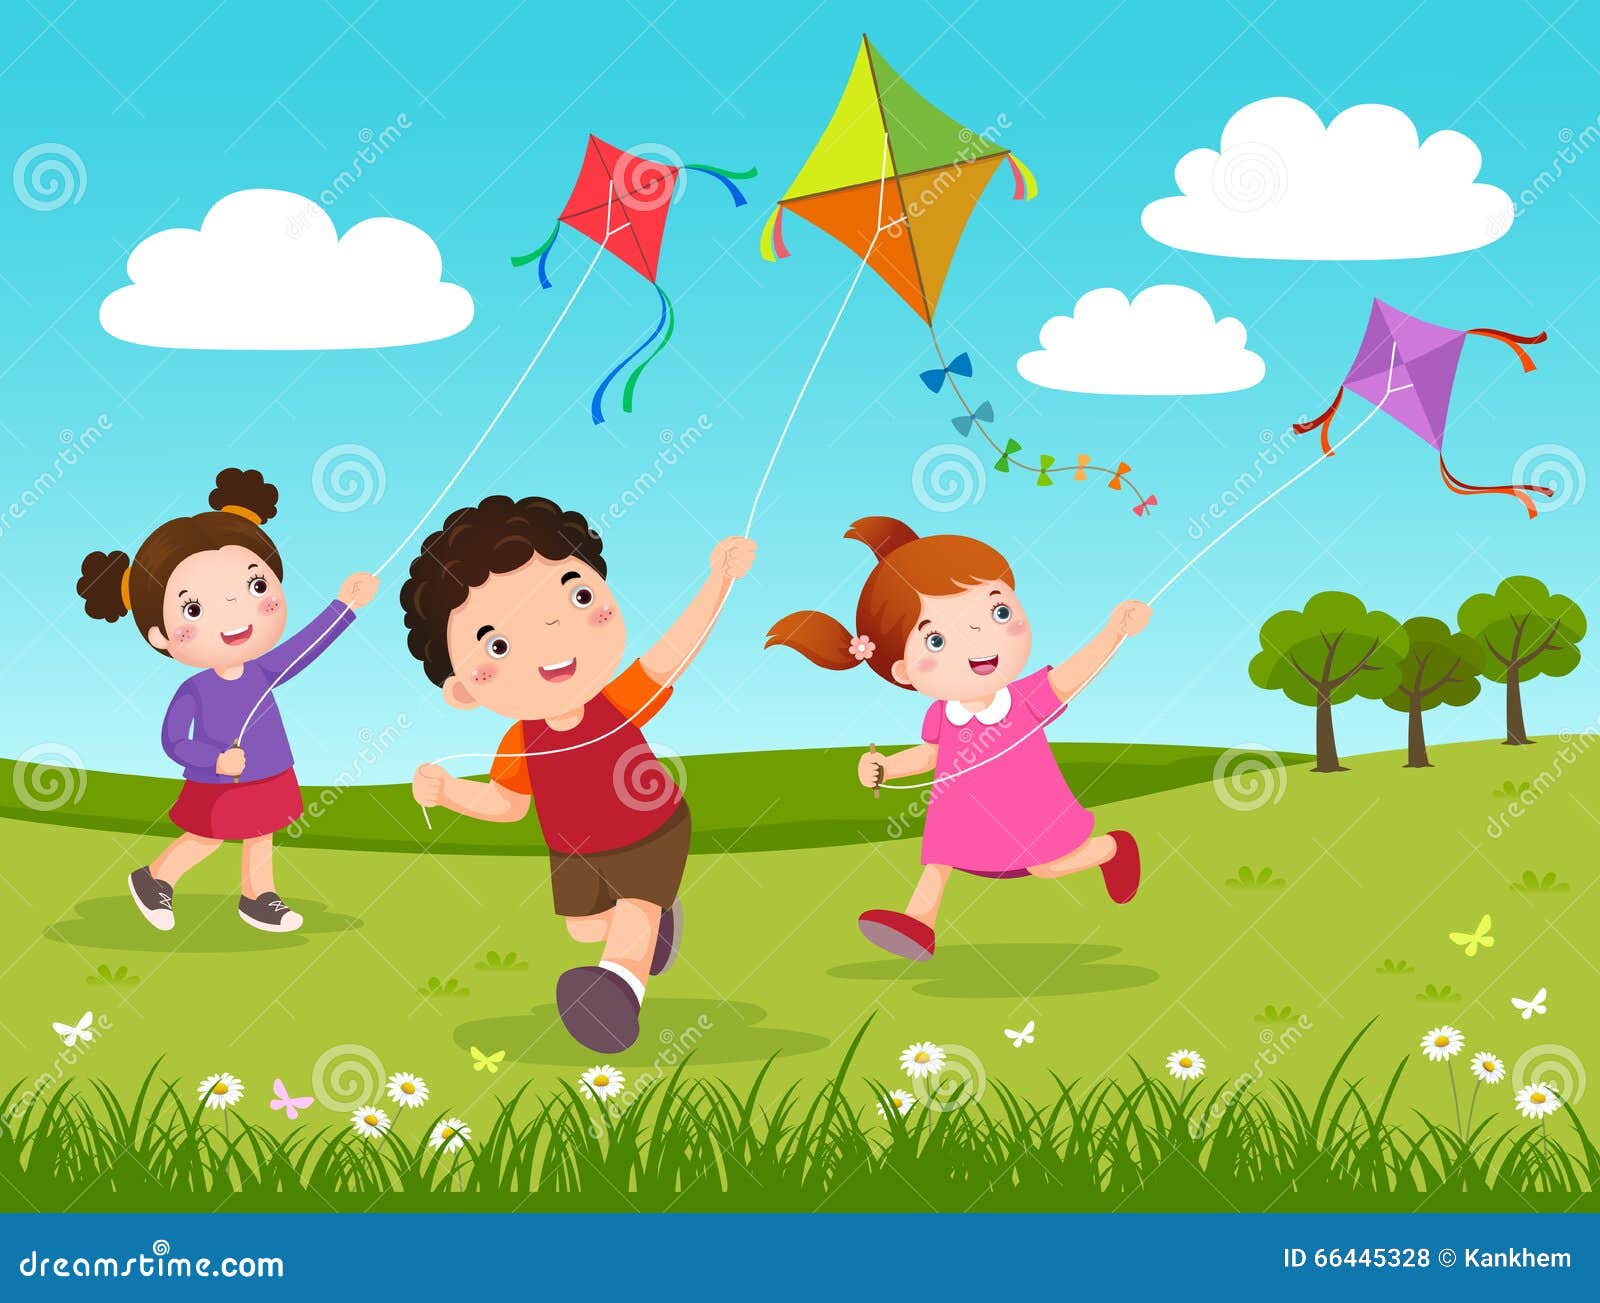 three kids flying kites in the park